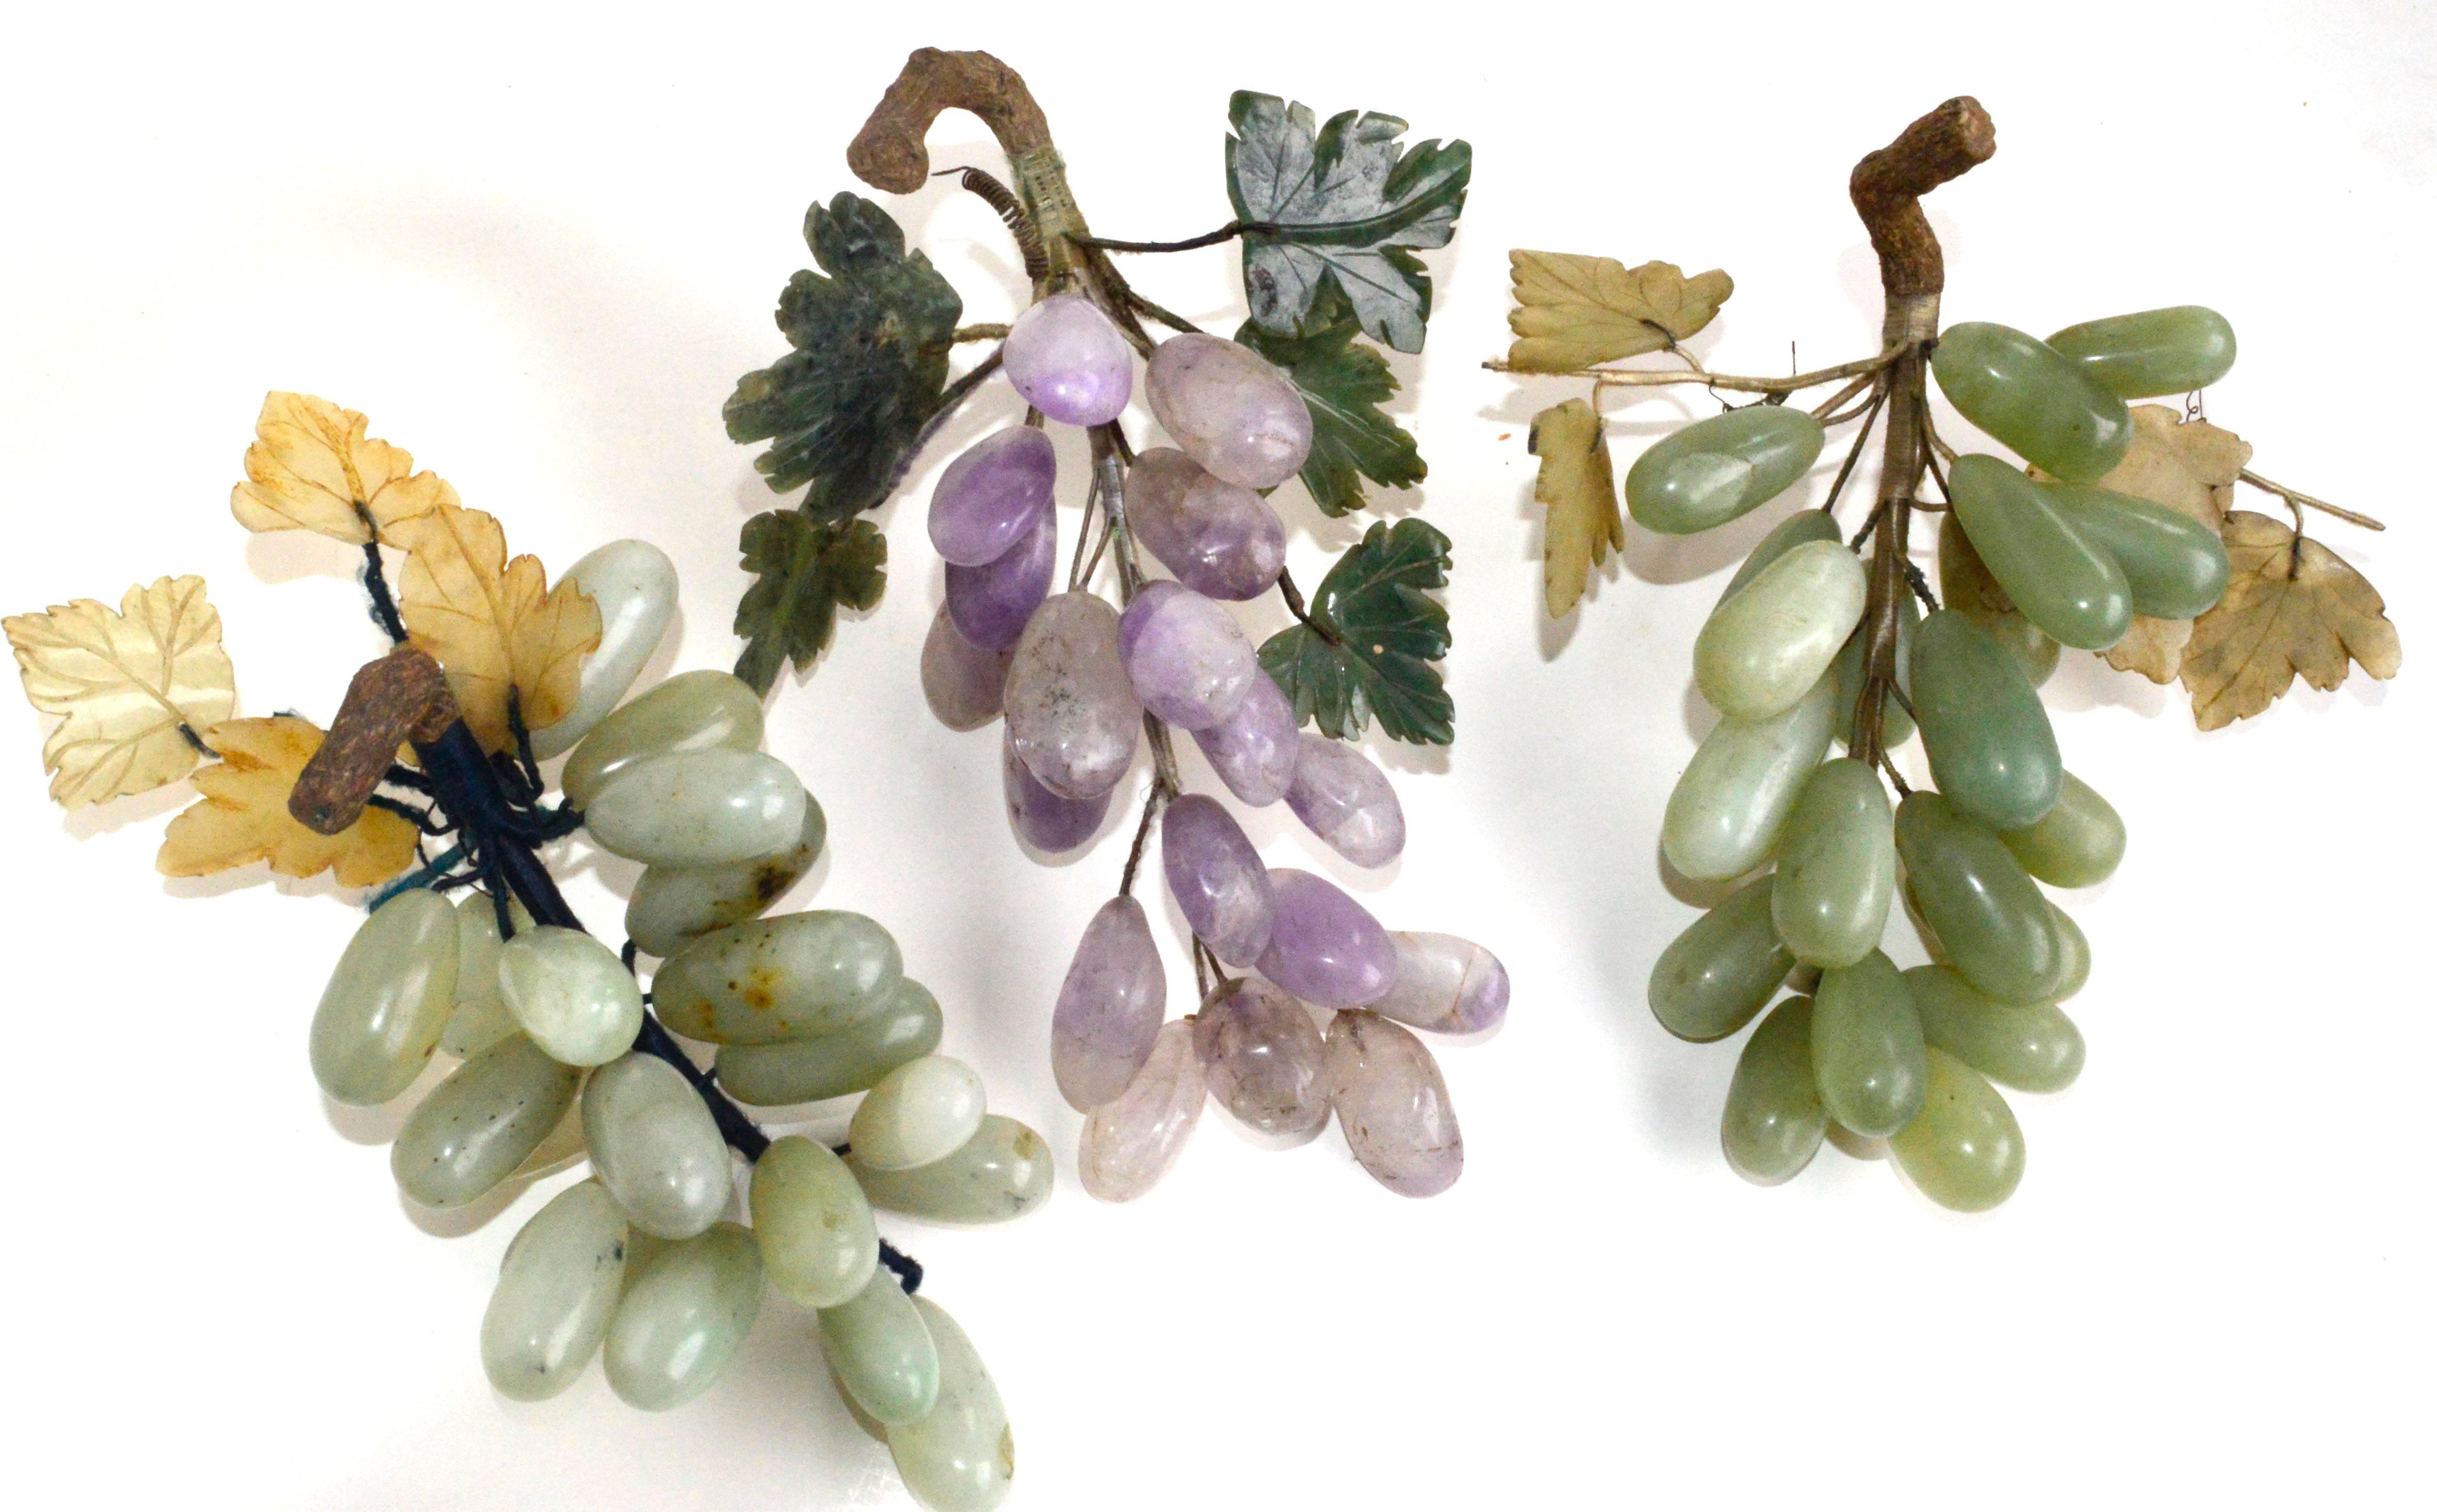 Grouping of three bunches of carved semi-precious stone grapes: One done in Amethyst, two in jade with jade leaves and wood stems. Vintage, handmade in China. Approximate size of each bunch, measures 9